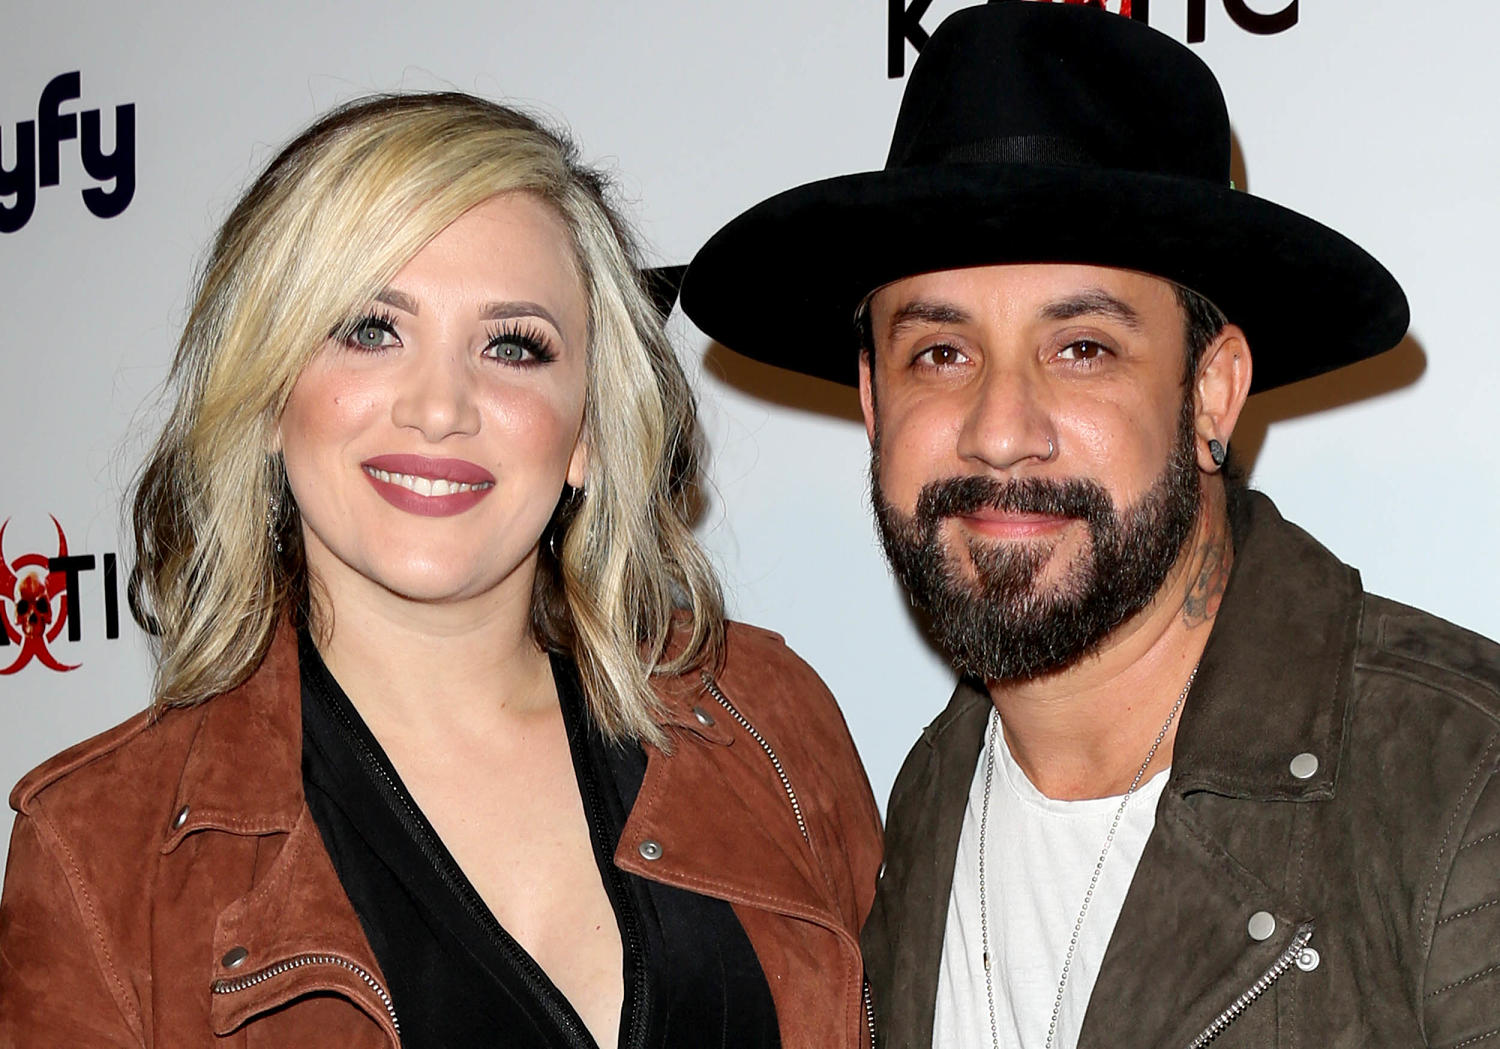 Backstreet Boys’ AJ McLean and his wife ‘officially’ call it quits after yearlong separation